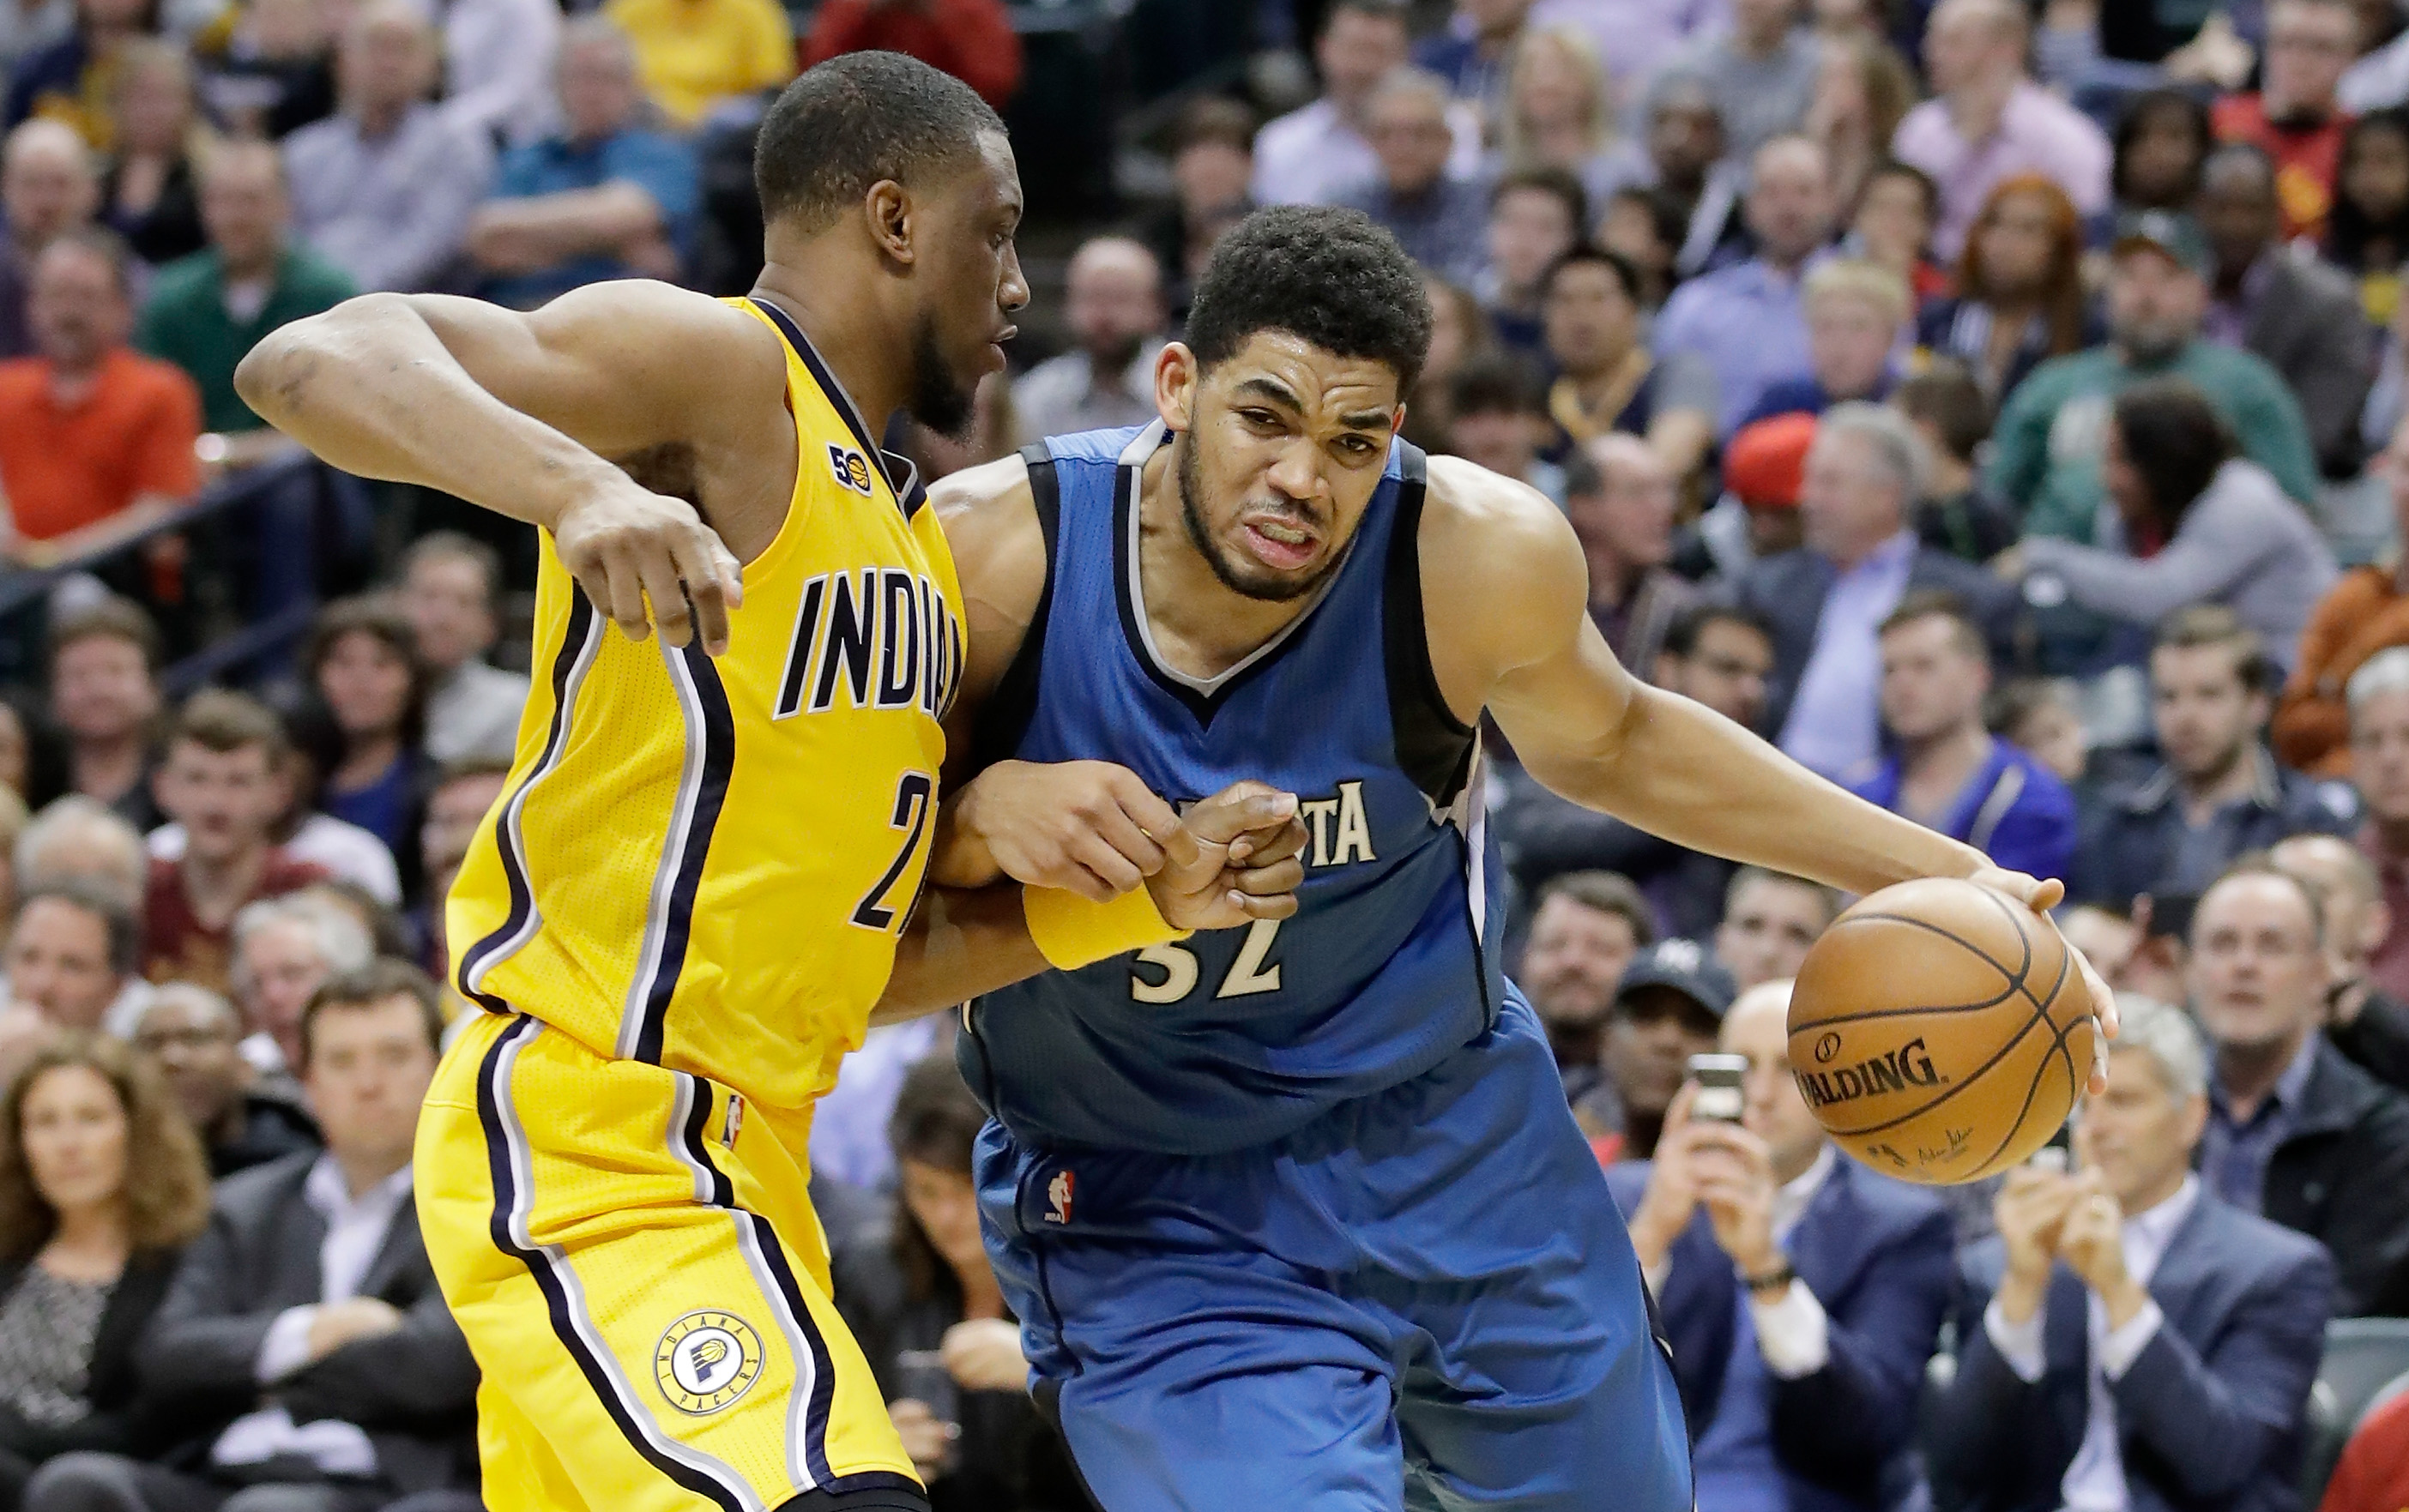 Karl-Anthony Towns of the Minnesota Timberwolves.